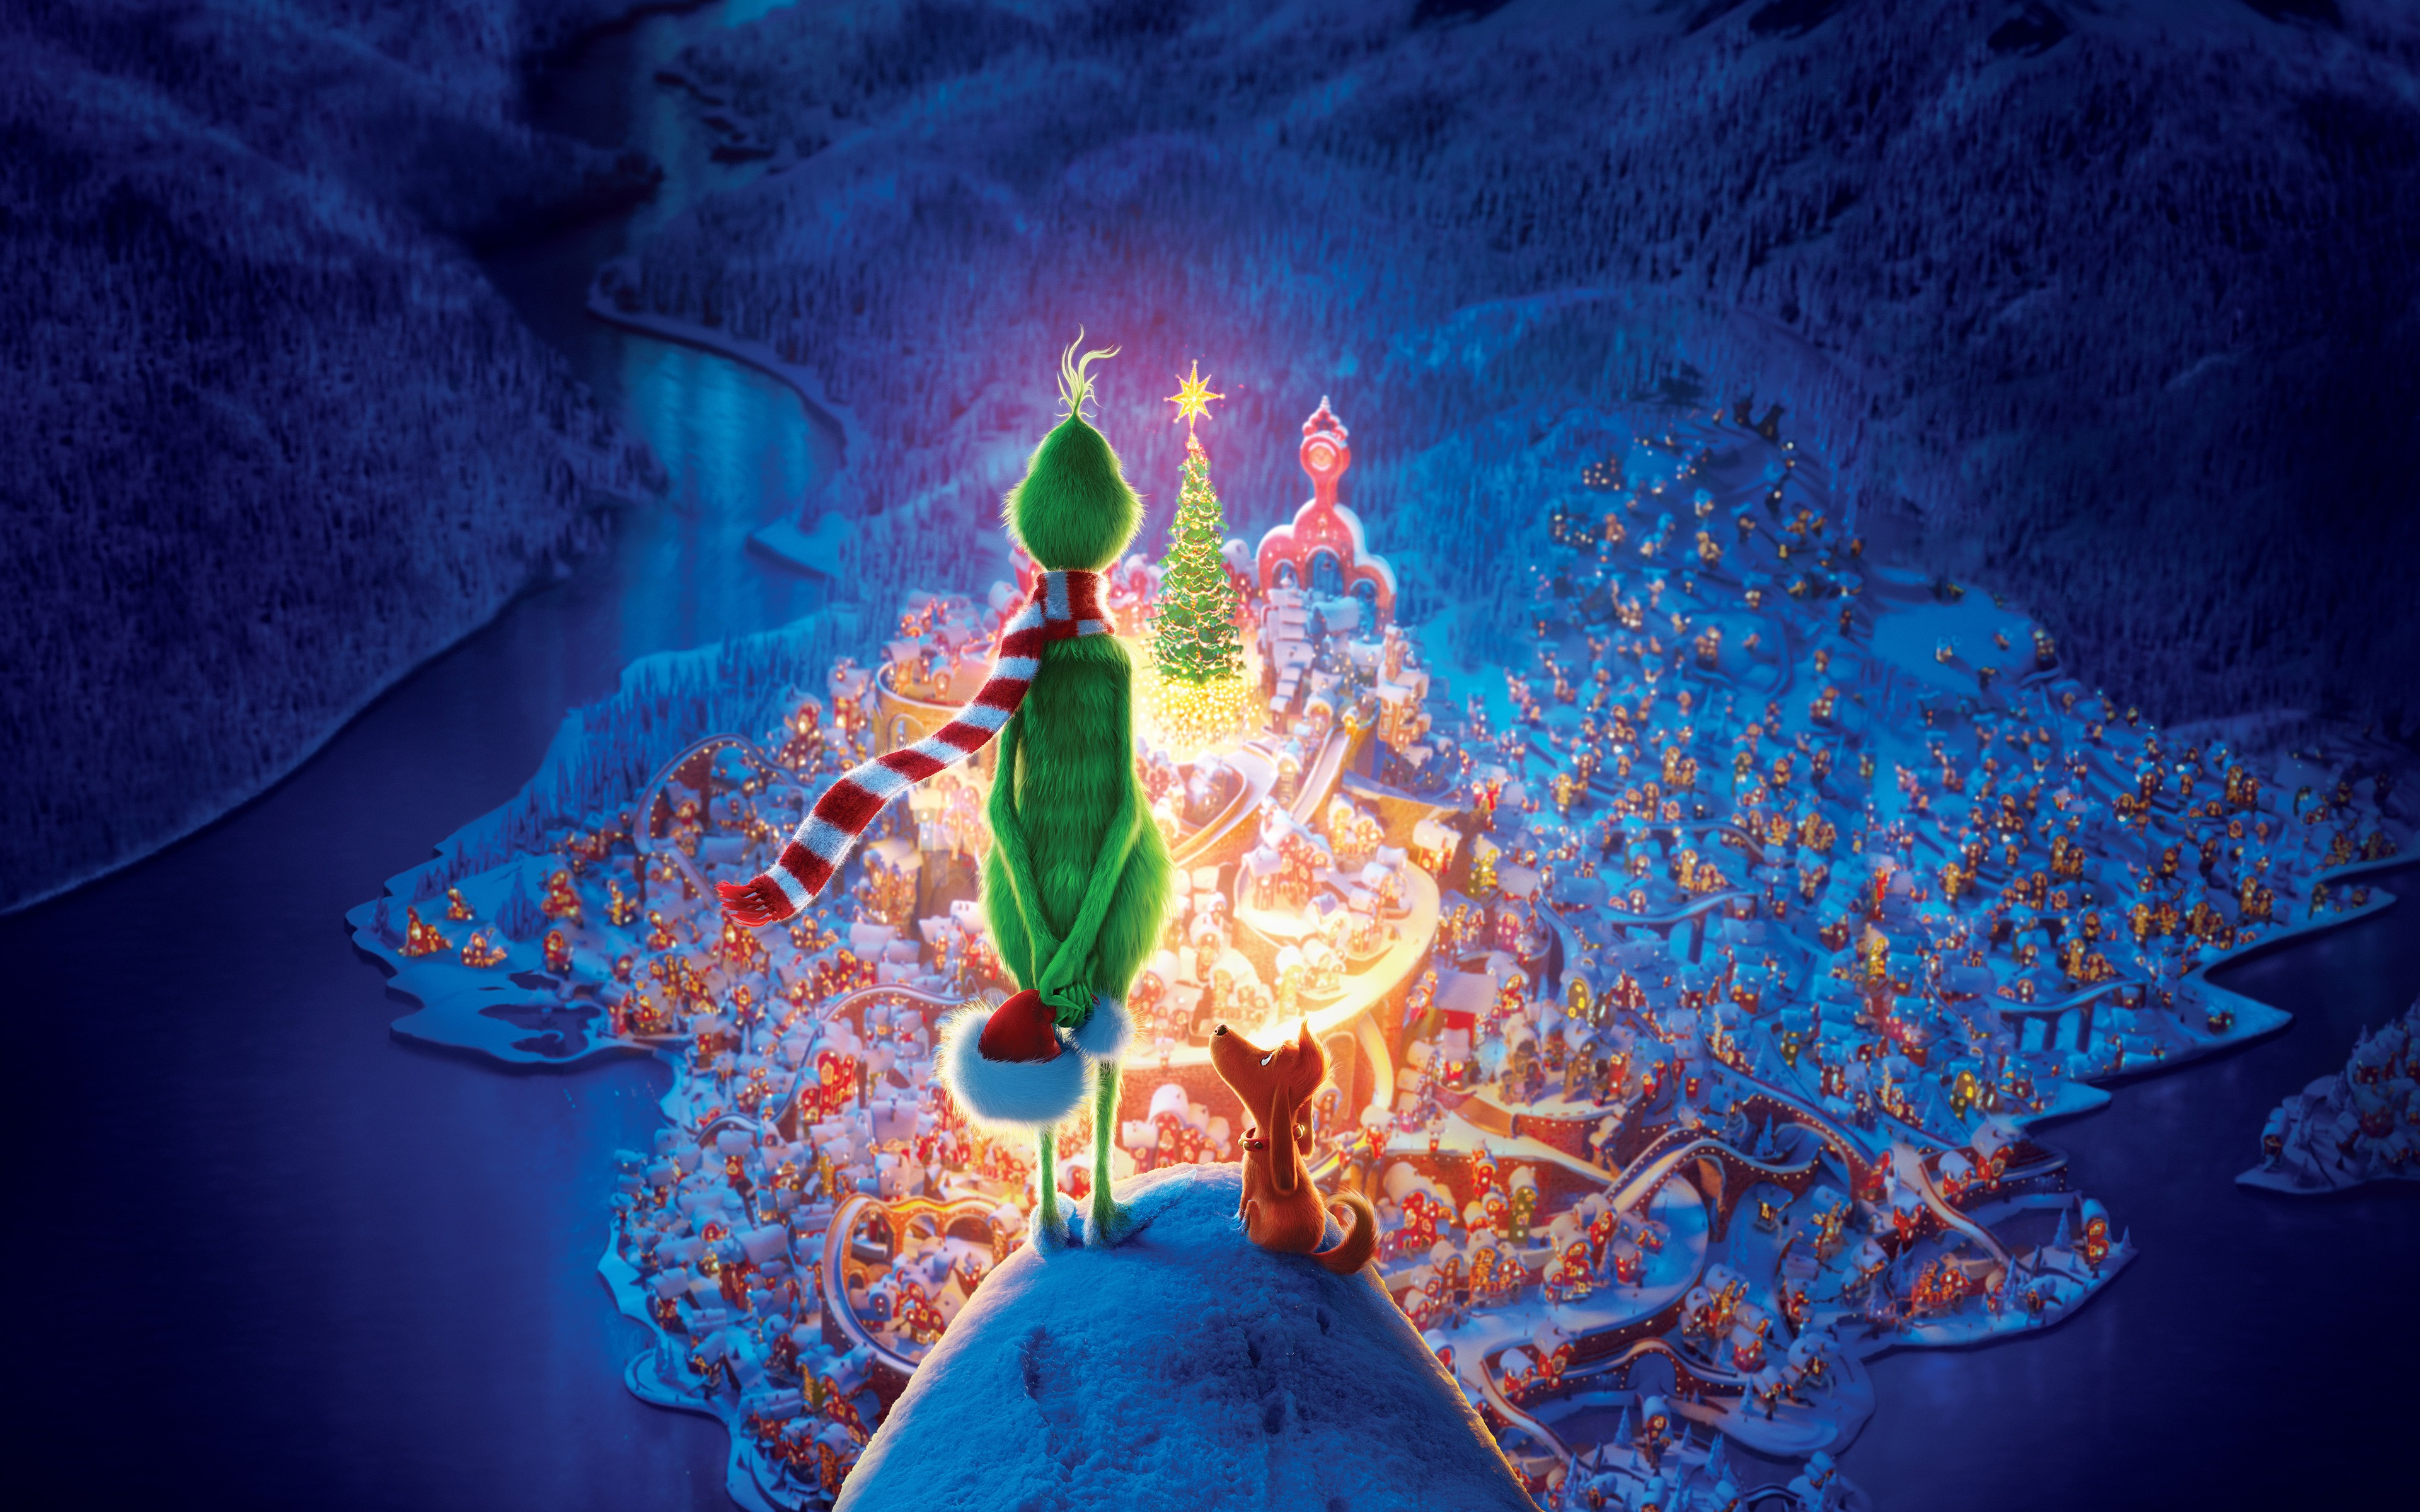 The Grinch 2018 Animation Movie 4k Poster Wallpaper - HD Wallpaper 